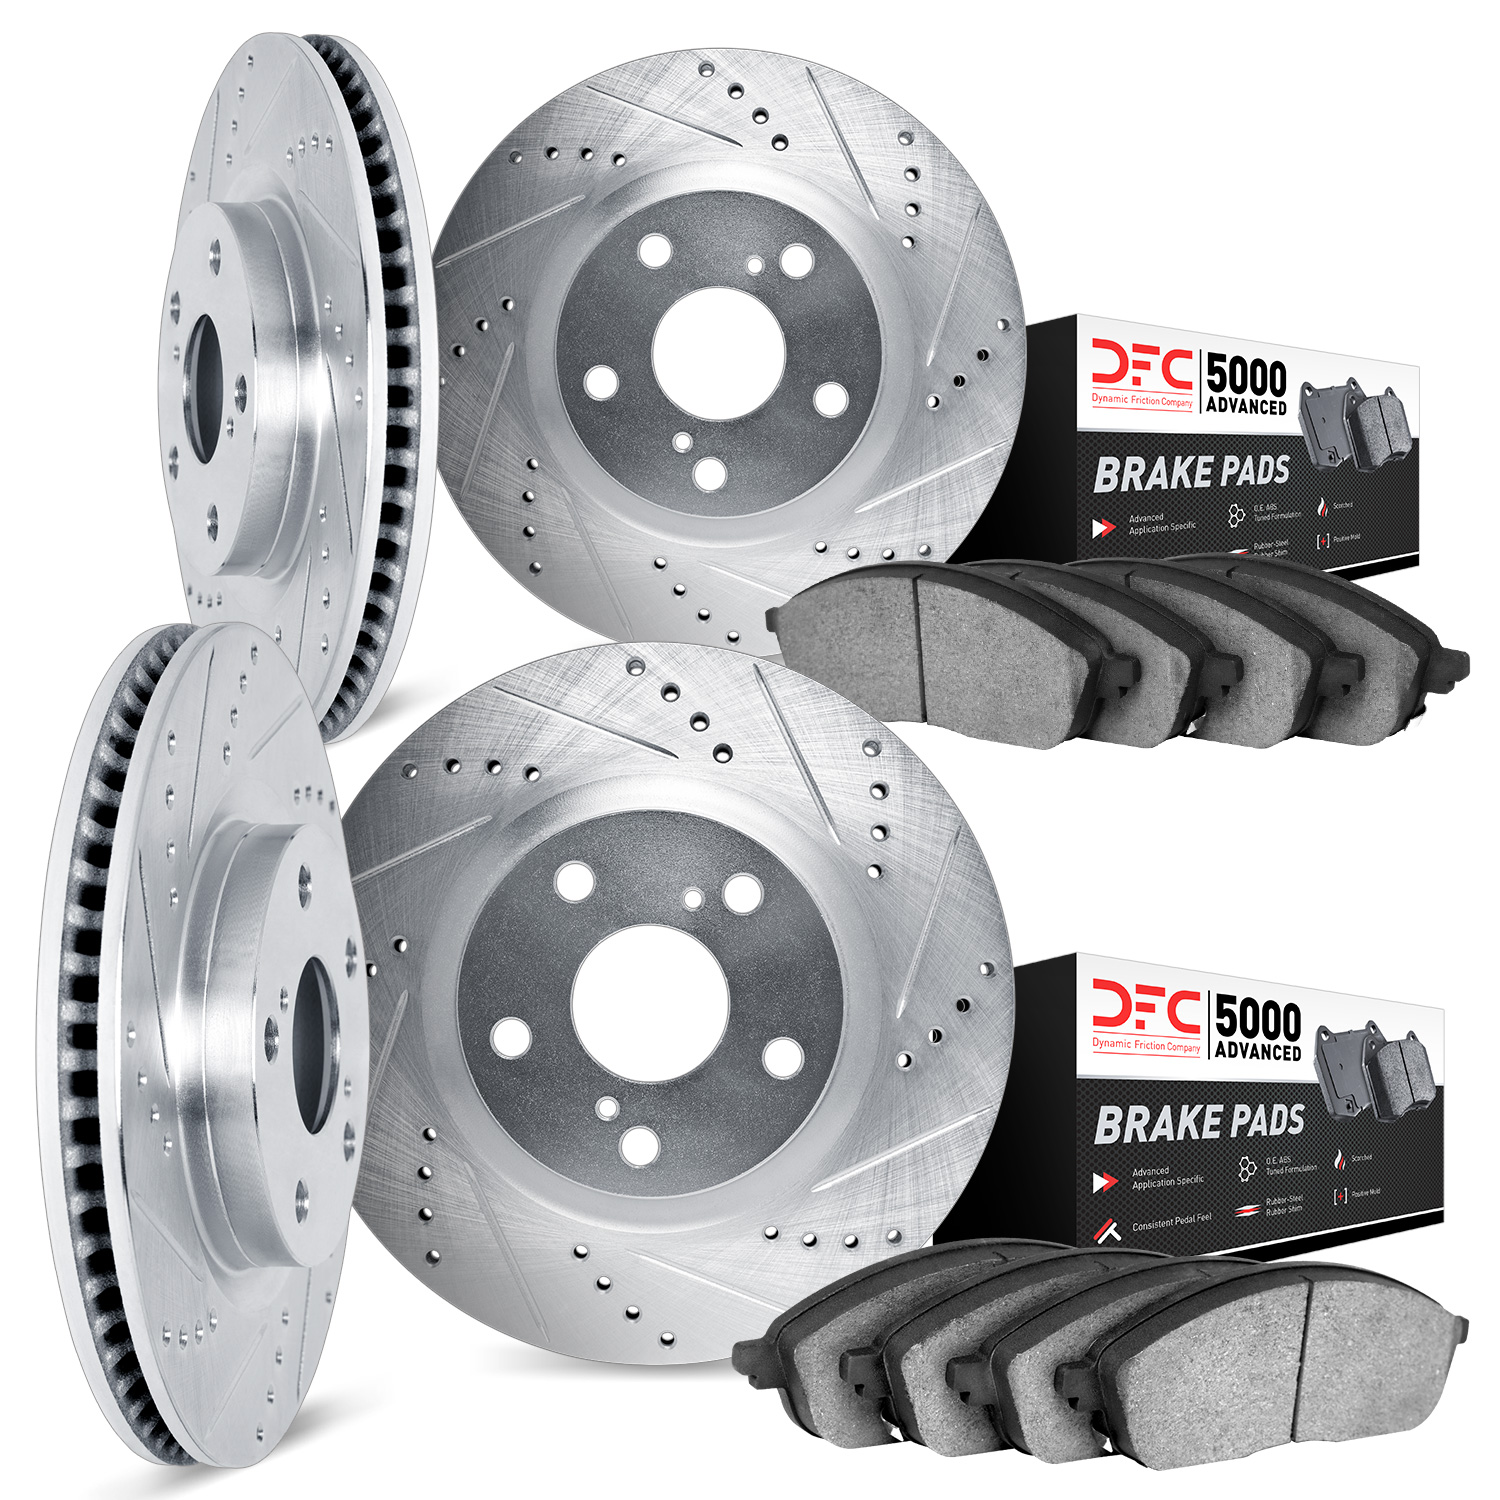 7504-31022 Drilled/Slotted Brake Rotors w/5000 Advanced Brake Pads Kit [Silver], 2008-2011 BMW, Position: Front and Rear